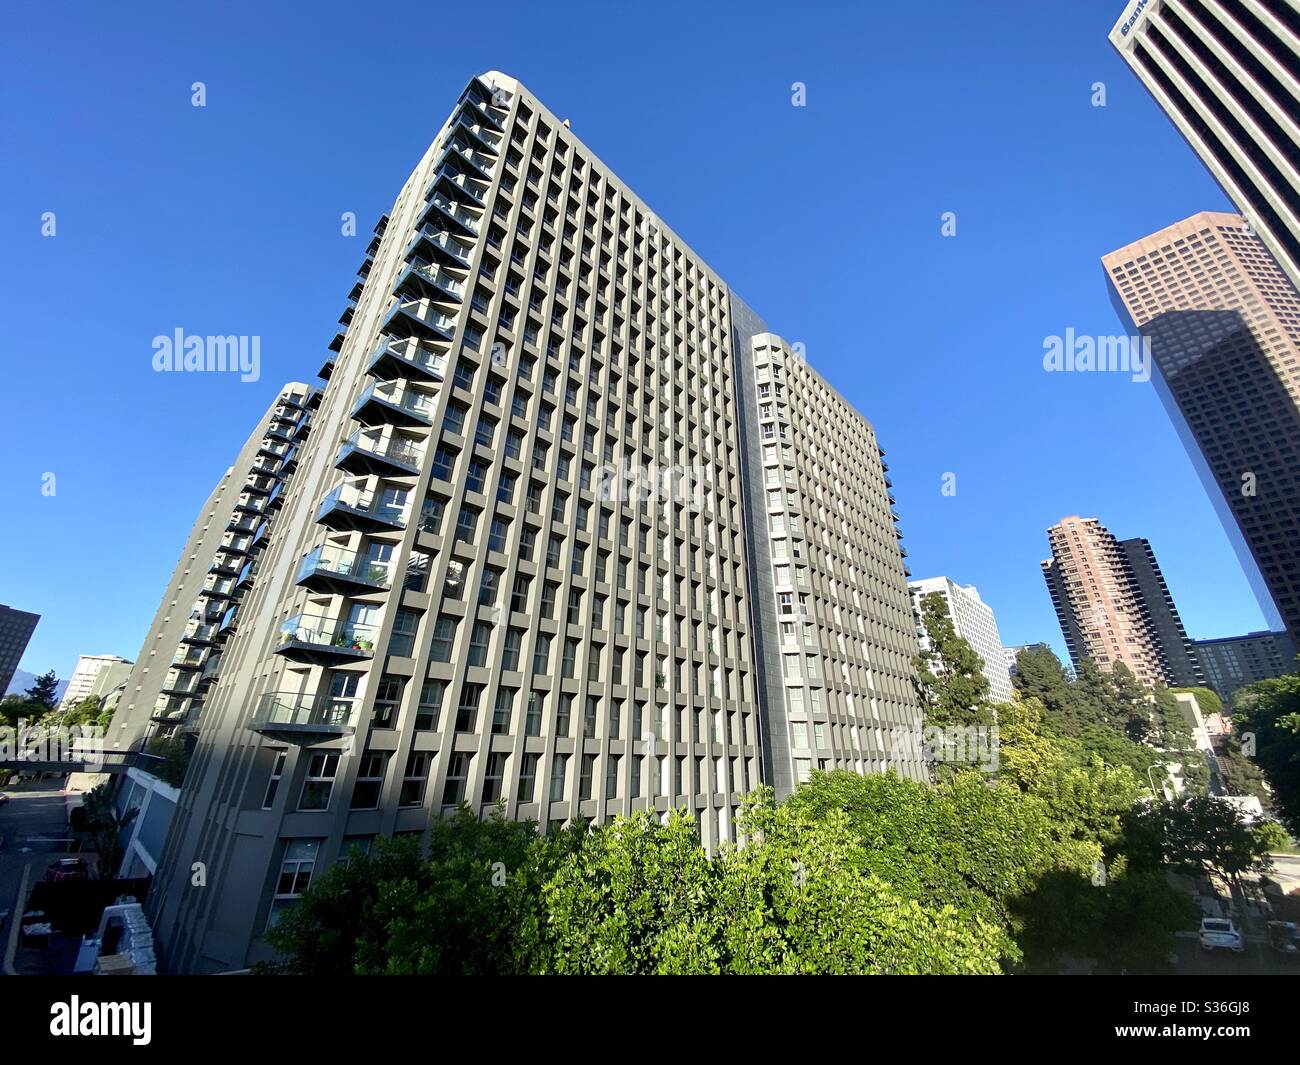 LOS ANGELES, CA, MAY 2020: Bunker Hill Towers apartment building on the north west side of Downtown Stock Photo